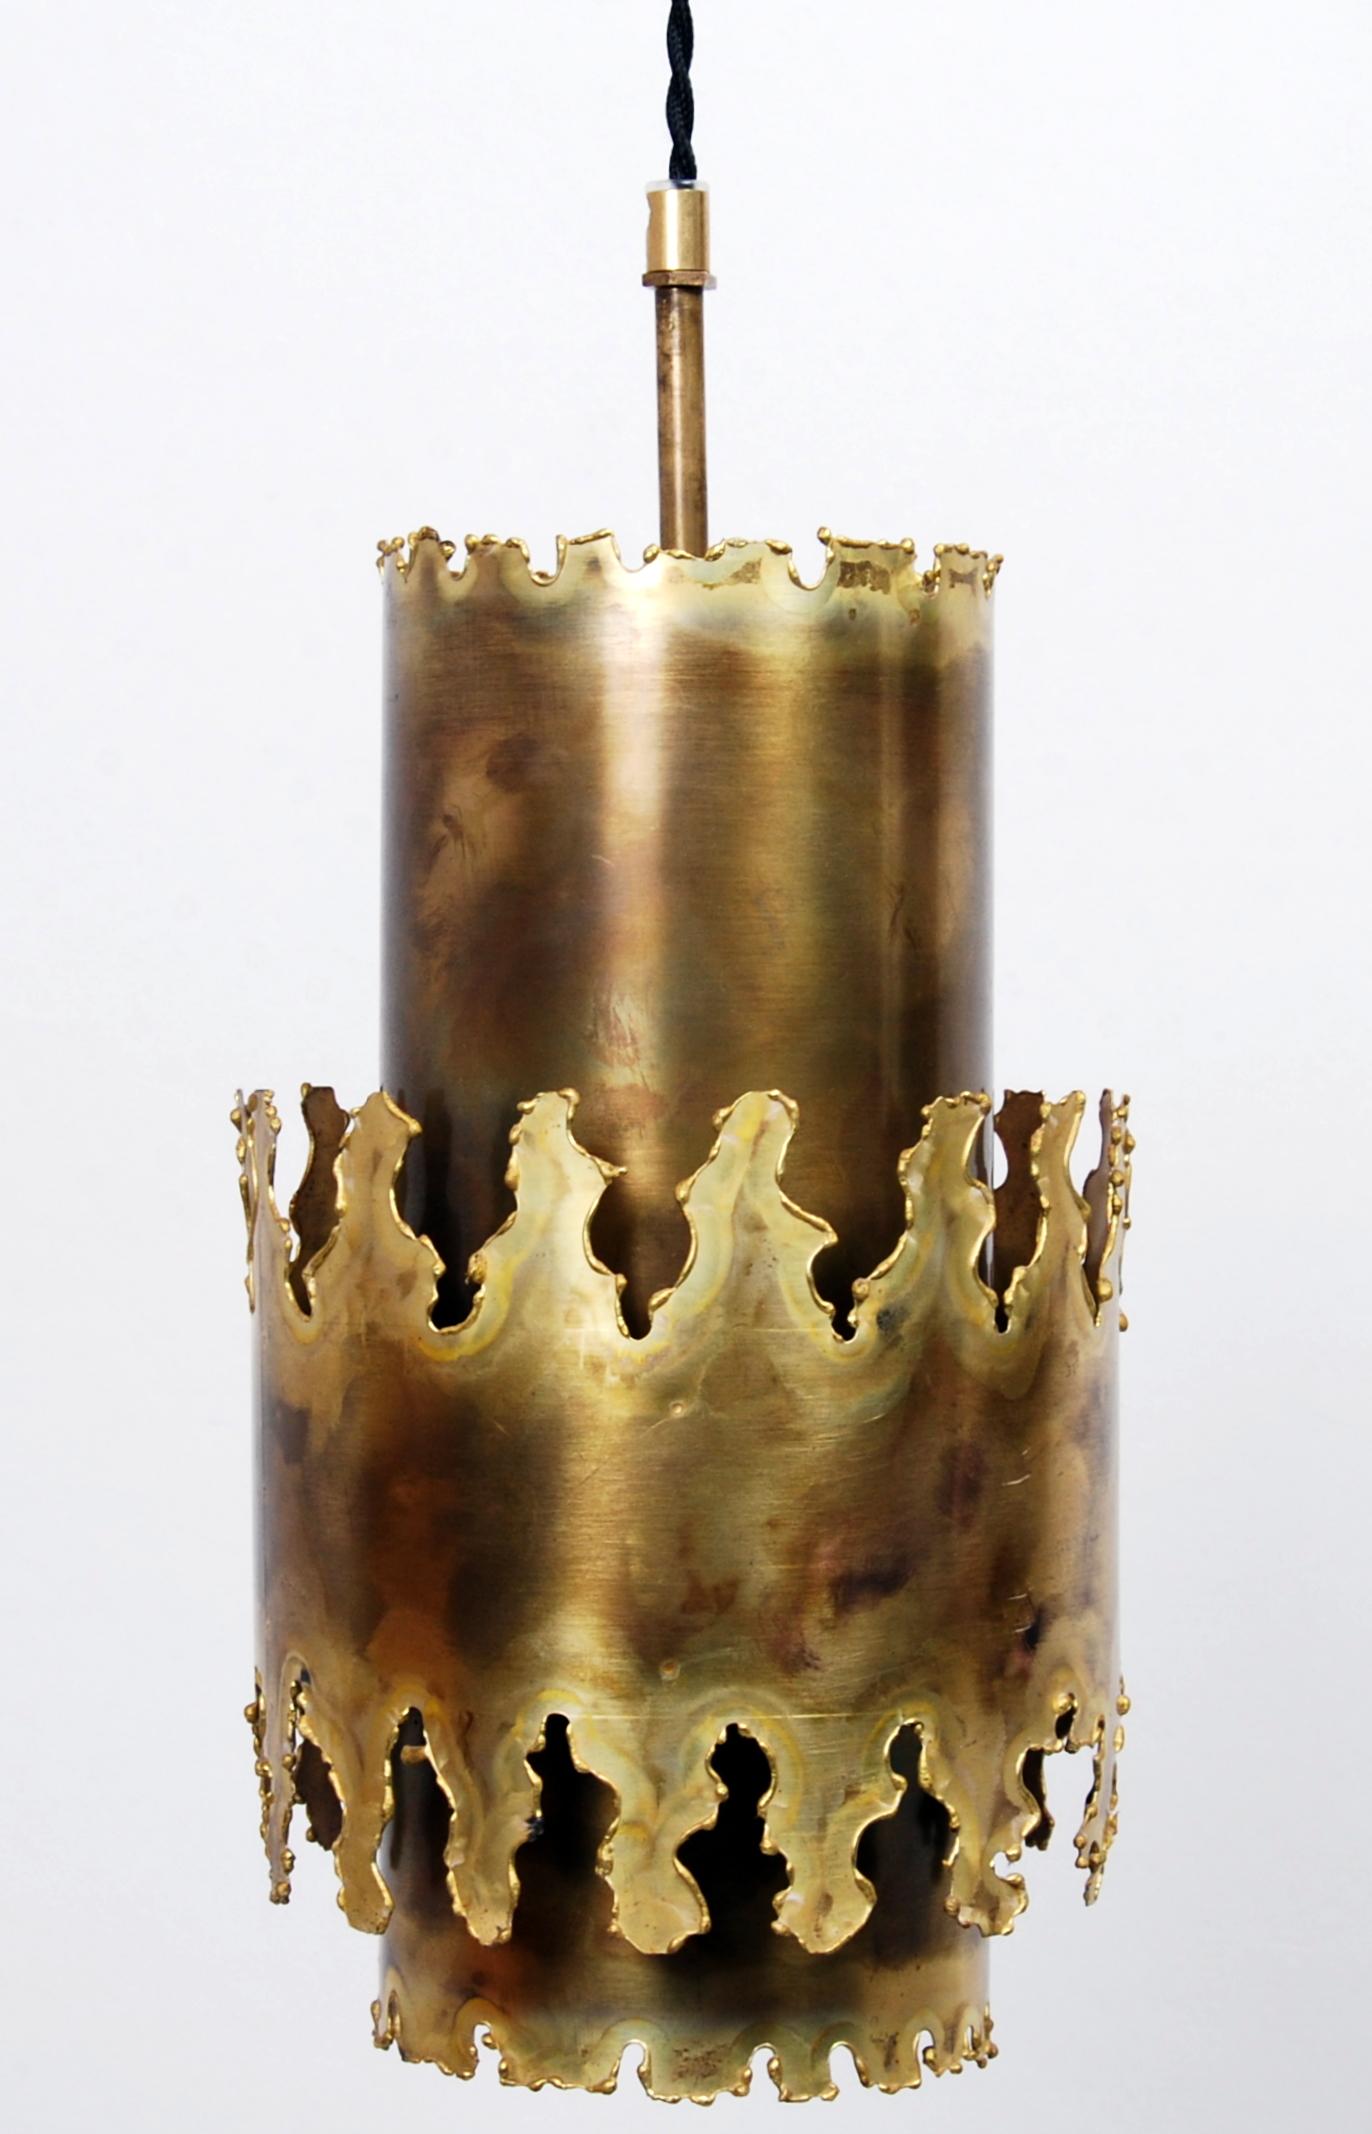 Handmade Brutalist brass pendant made of acid treated and flame cut brass in three layers designed by Svend Aage Holm Sørensen for his own company Holm Sørensen & Co. It was manufactured in Denmark in the 1960s. Original cord replaced with a black